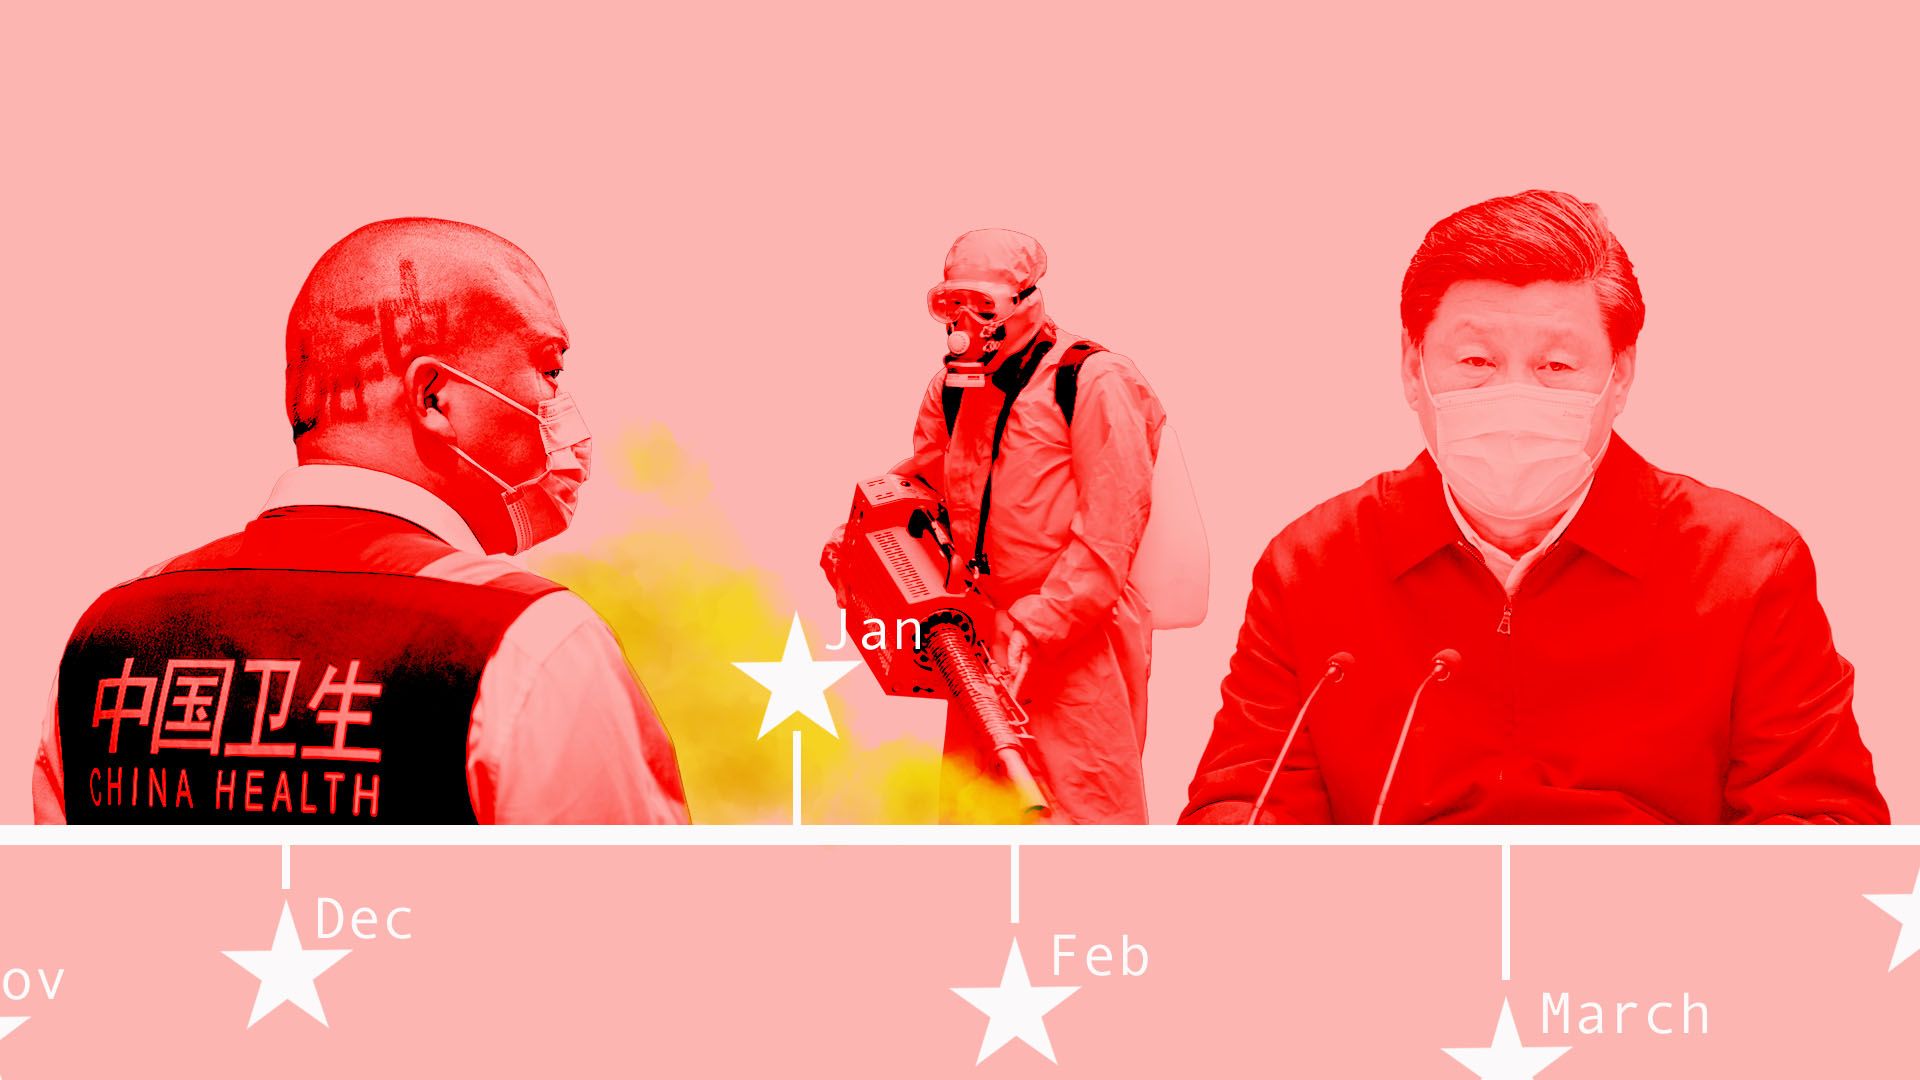 Photo illustration of a timeline featuring a medical team member, with hair shaved to read "Wuhan",  a volunteer disinfecting a community, and Xi Jinping wearing a medical mask